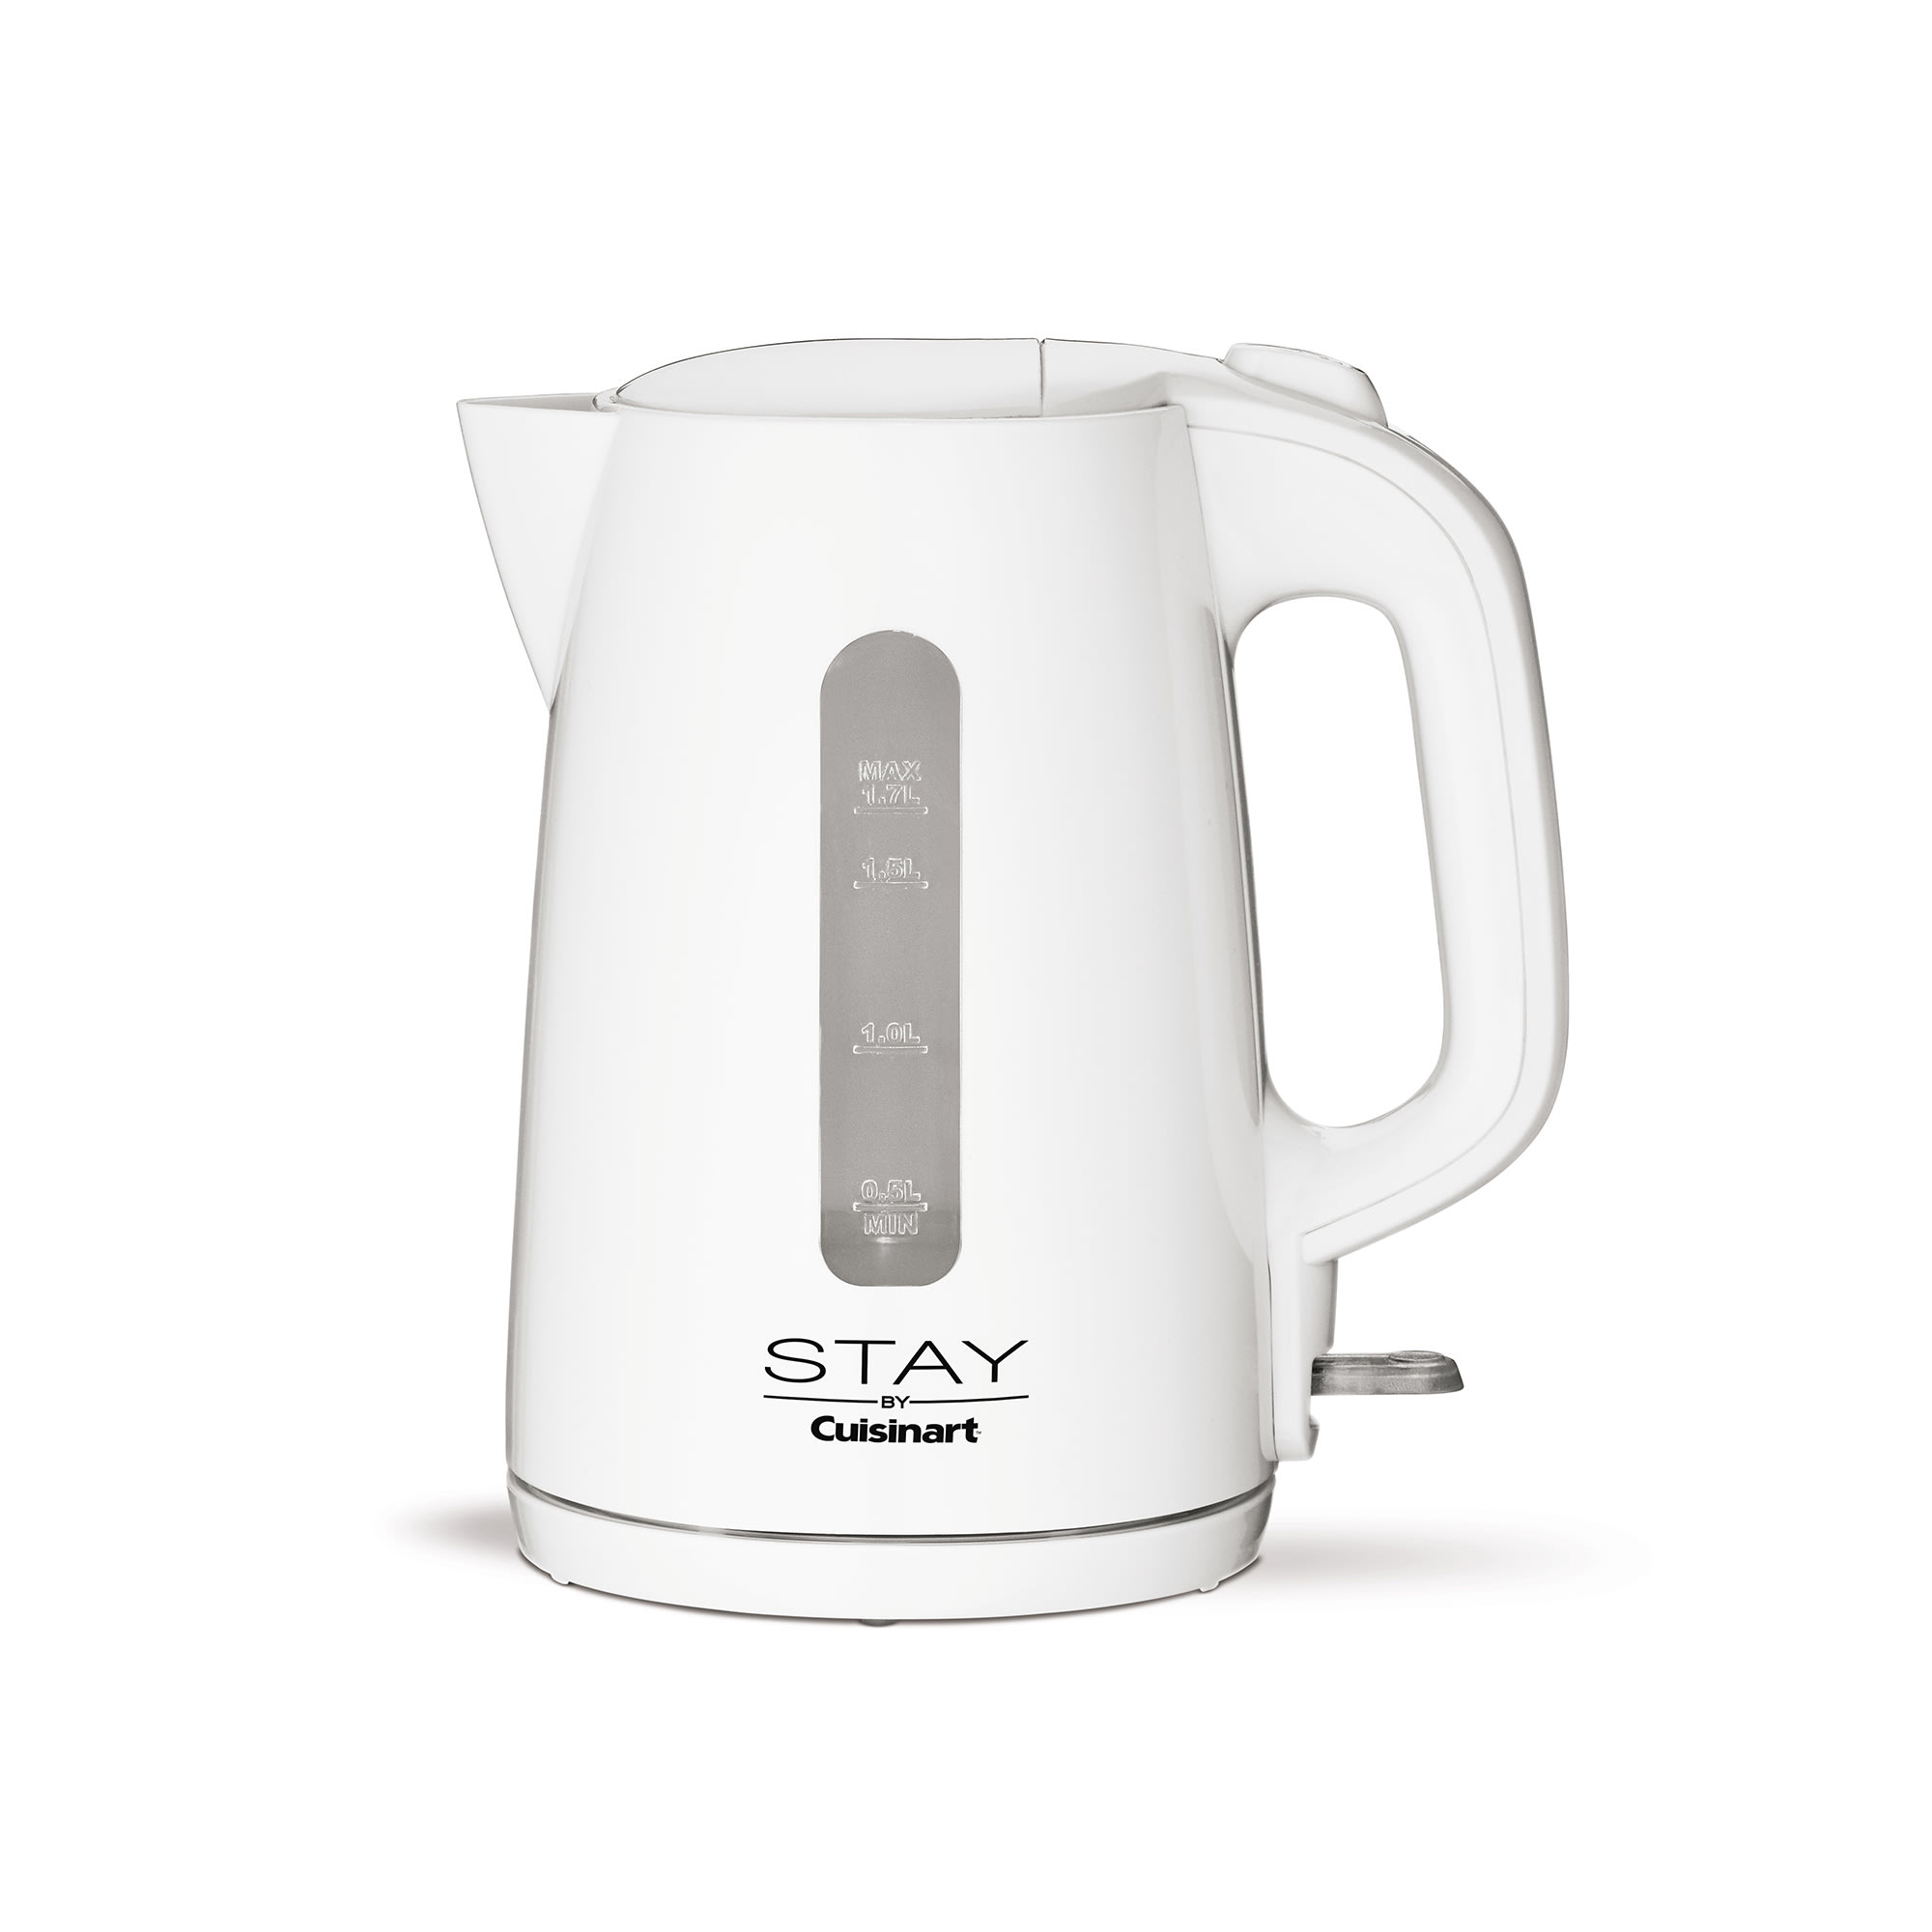 STAY by Cuisinart WCM280W White 12 Cup Coffee Maker - 120V